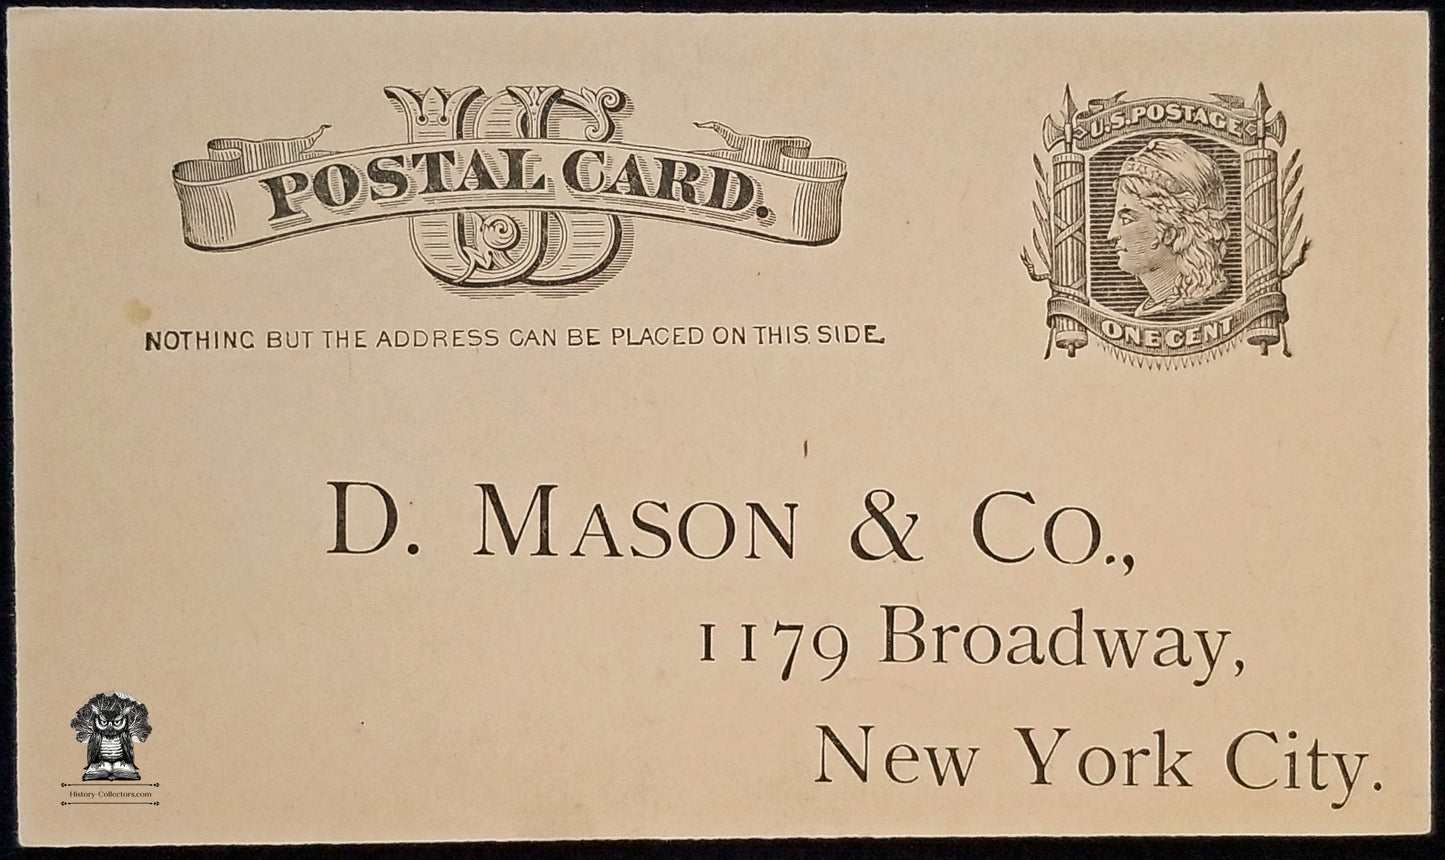 1884 D Mason & Co Advertising Perfection Lace Cabinets Order Form Postcard - 1179 Broadway New York City - One Cent Liberty Postal Card - Scott UX7